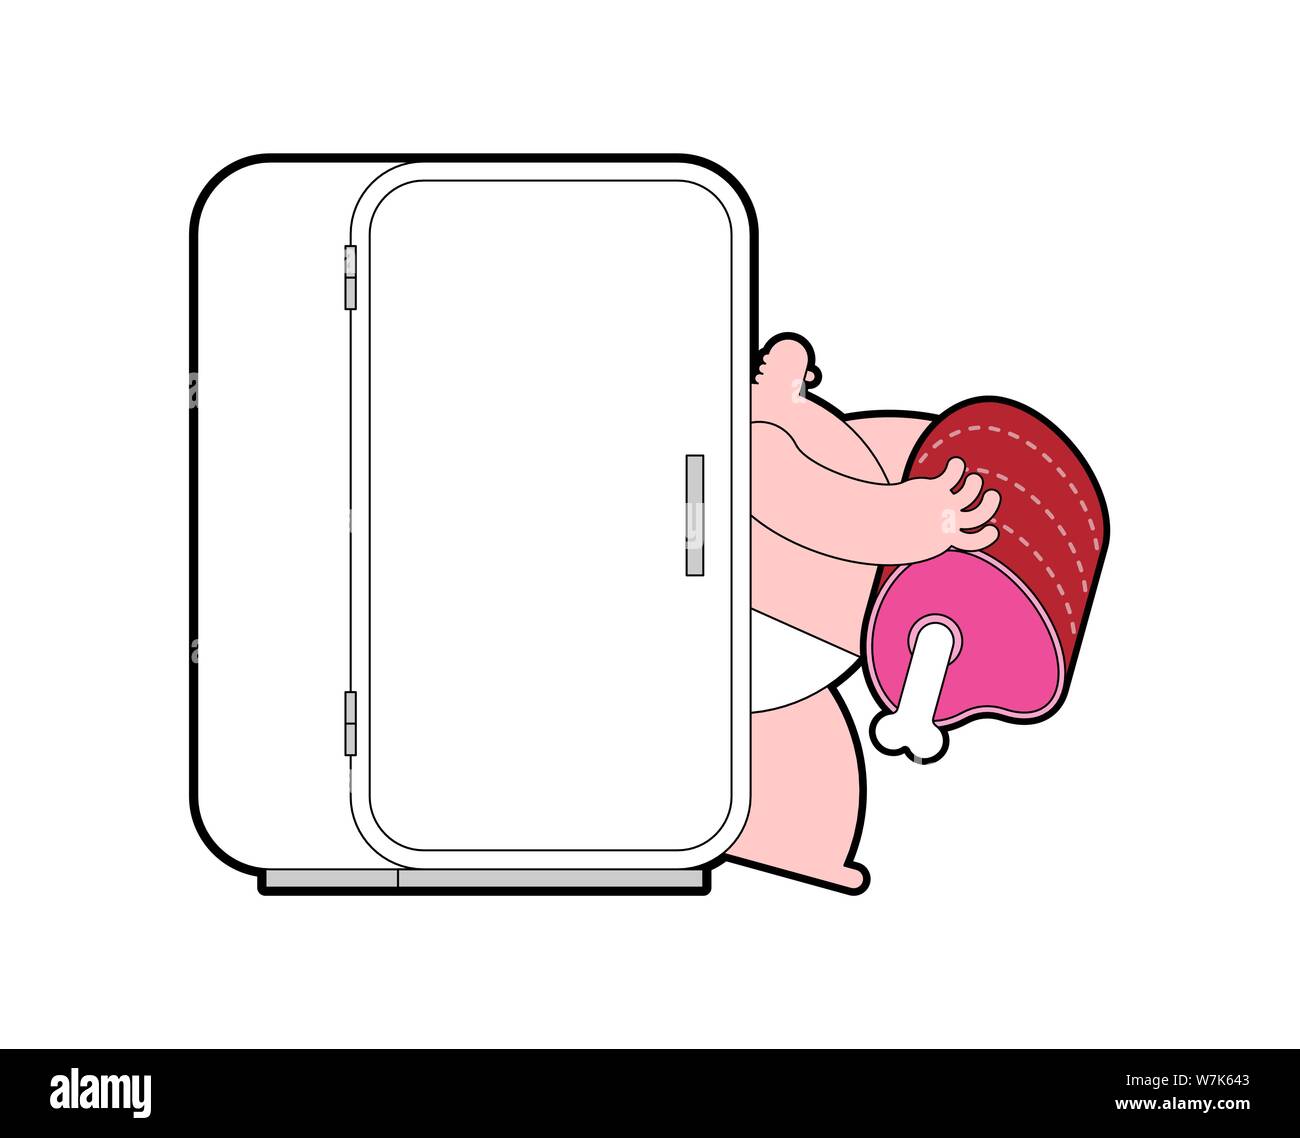 Fat man comes out of fridge with meat. vector illustration Stock Vector